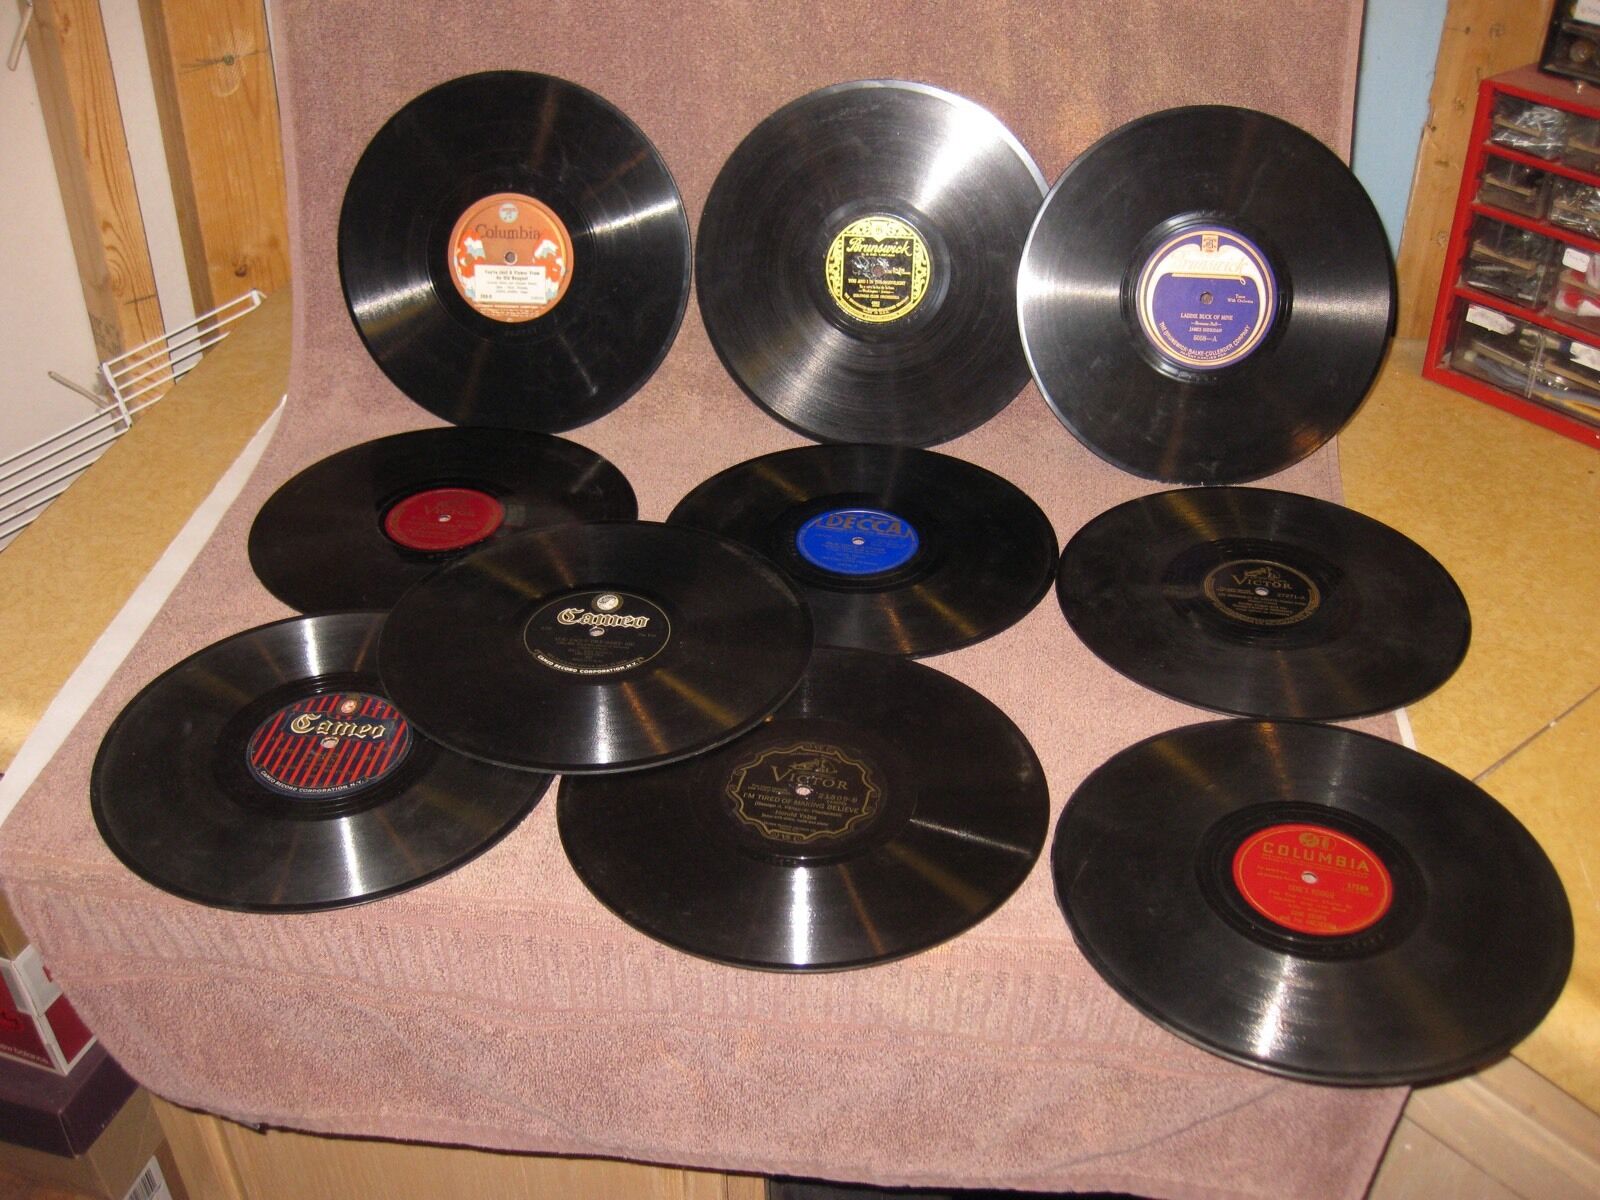 Mixed Lot of 10 Hillbilly / Country 78 RPM Records for Victrola Без бренда